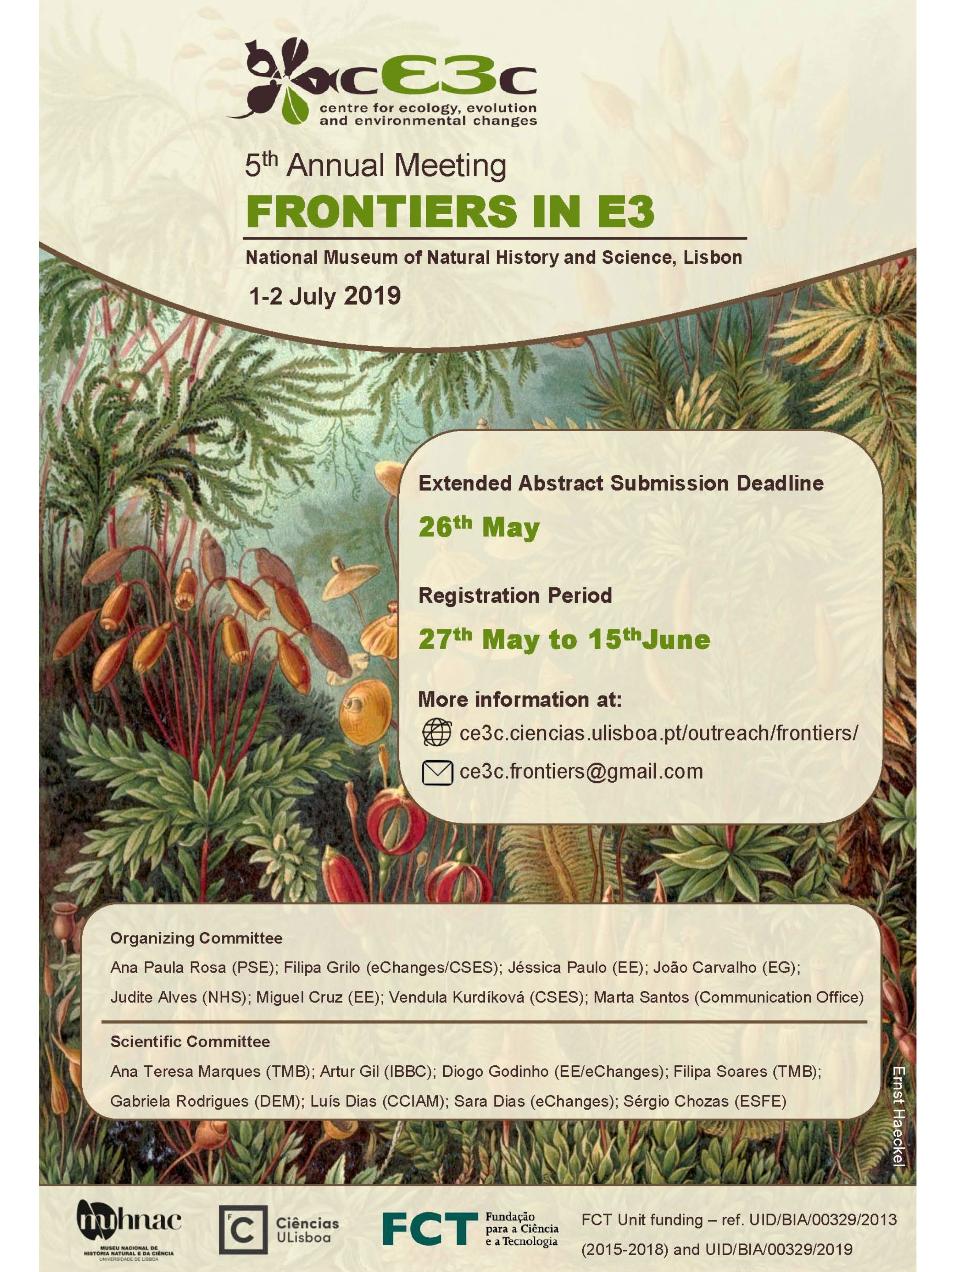 Frontiers in E3 5th CE3C Annual Meeting